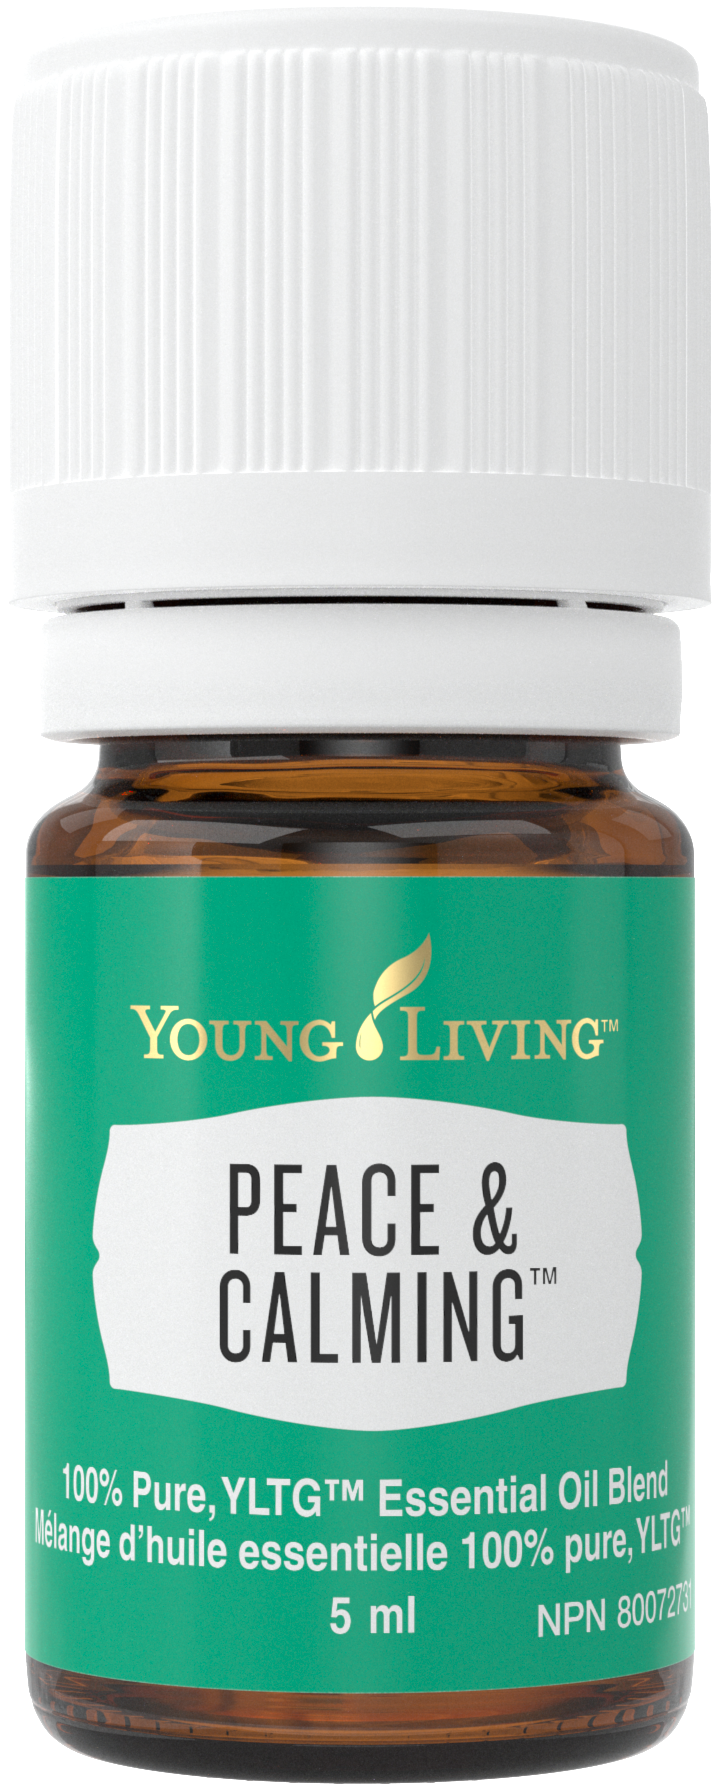 peace and calming essential oil